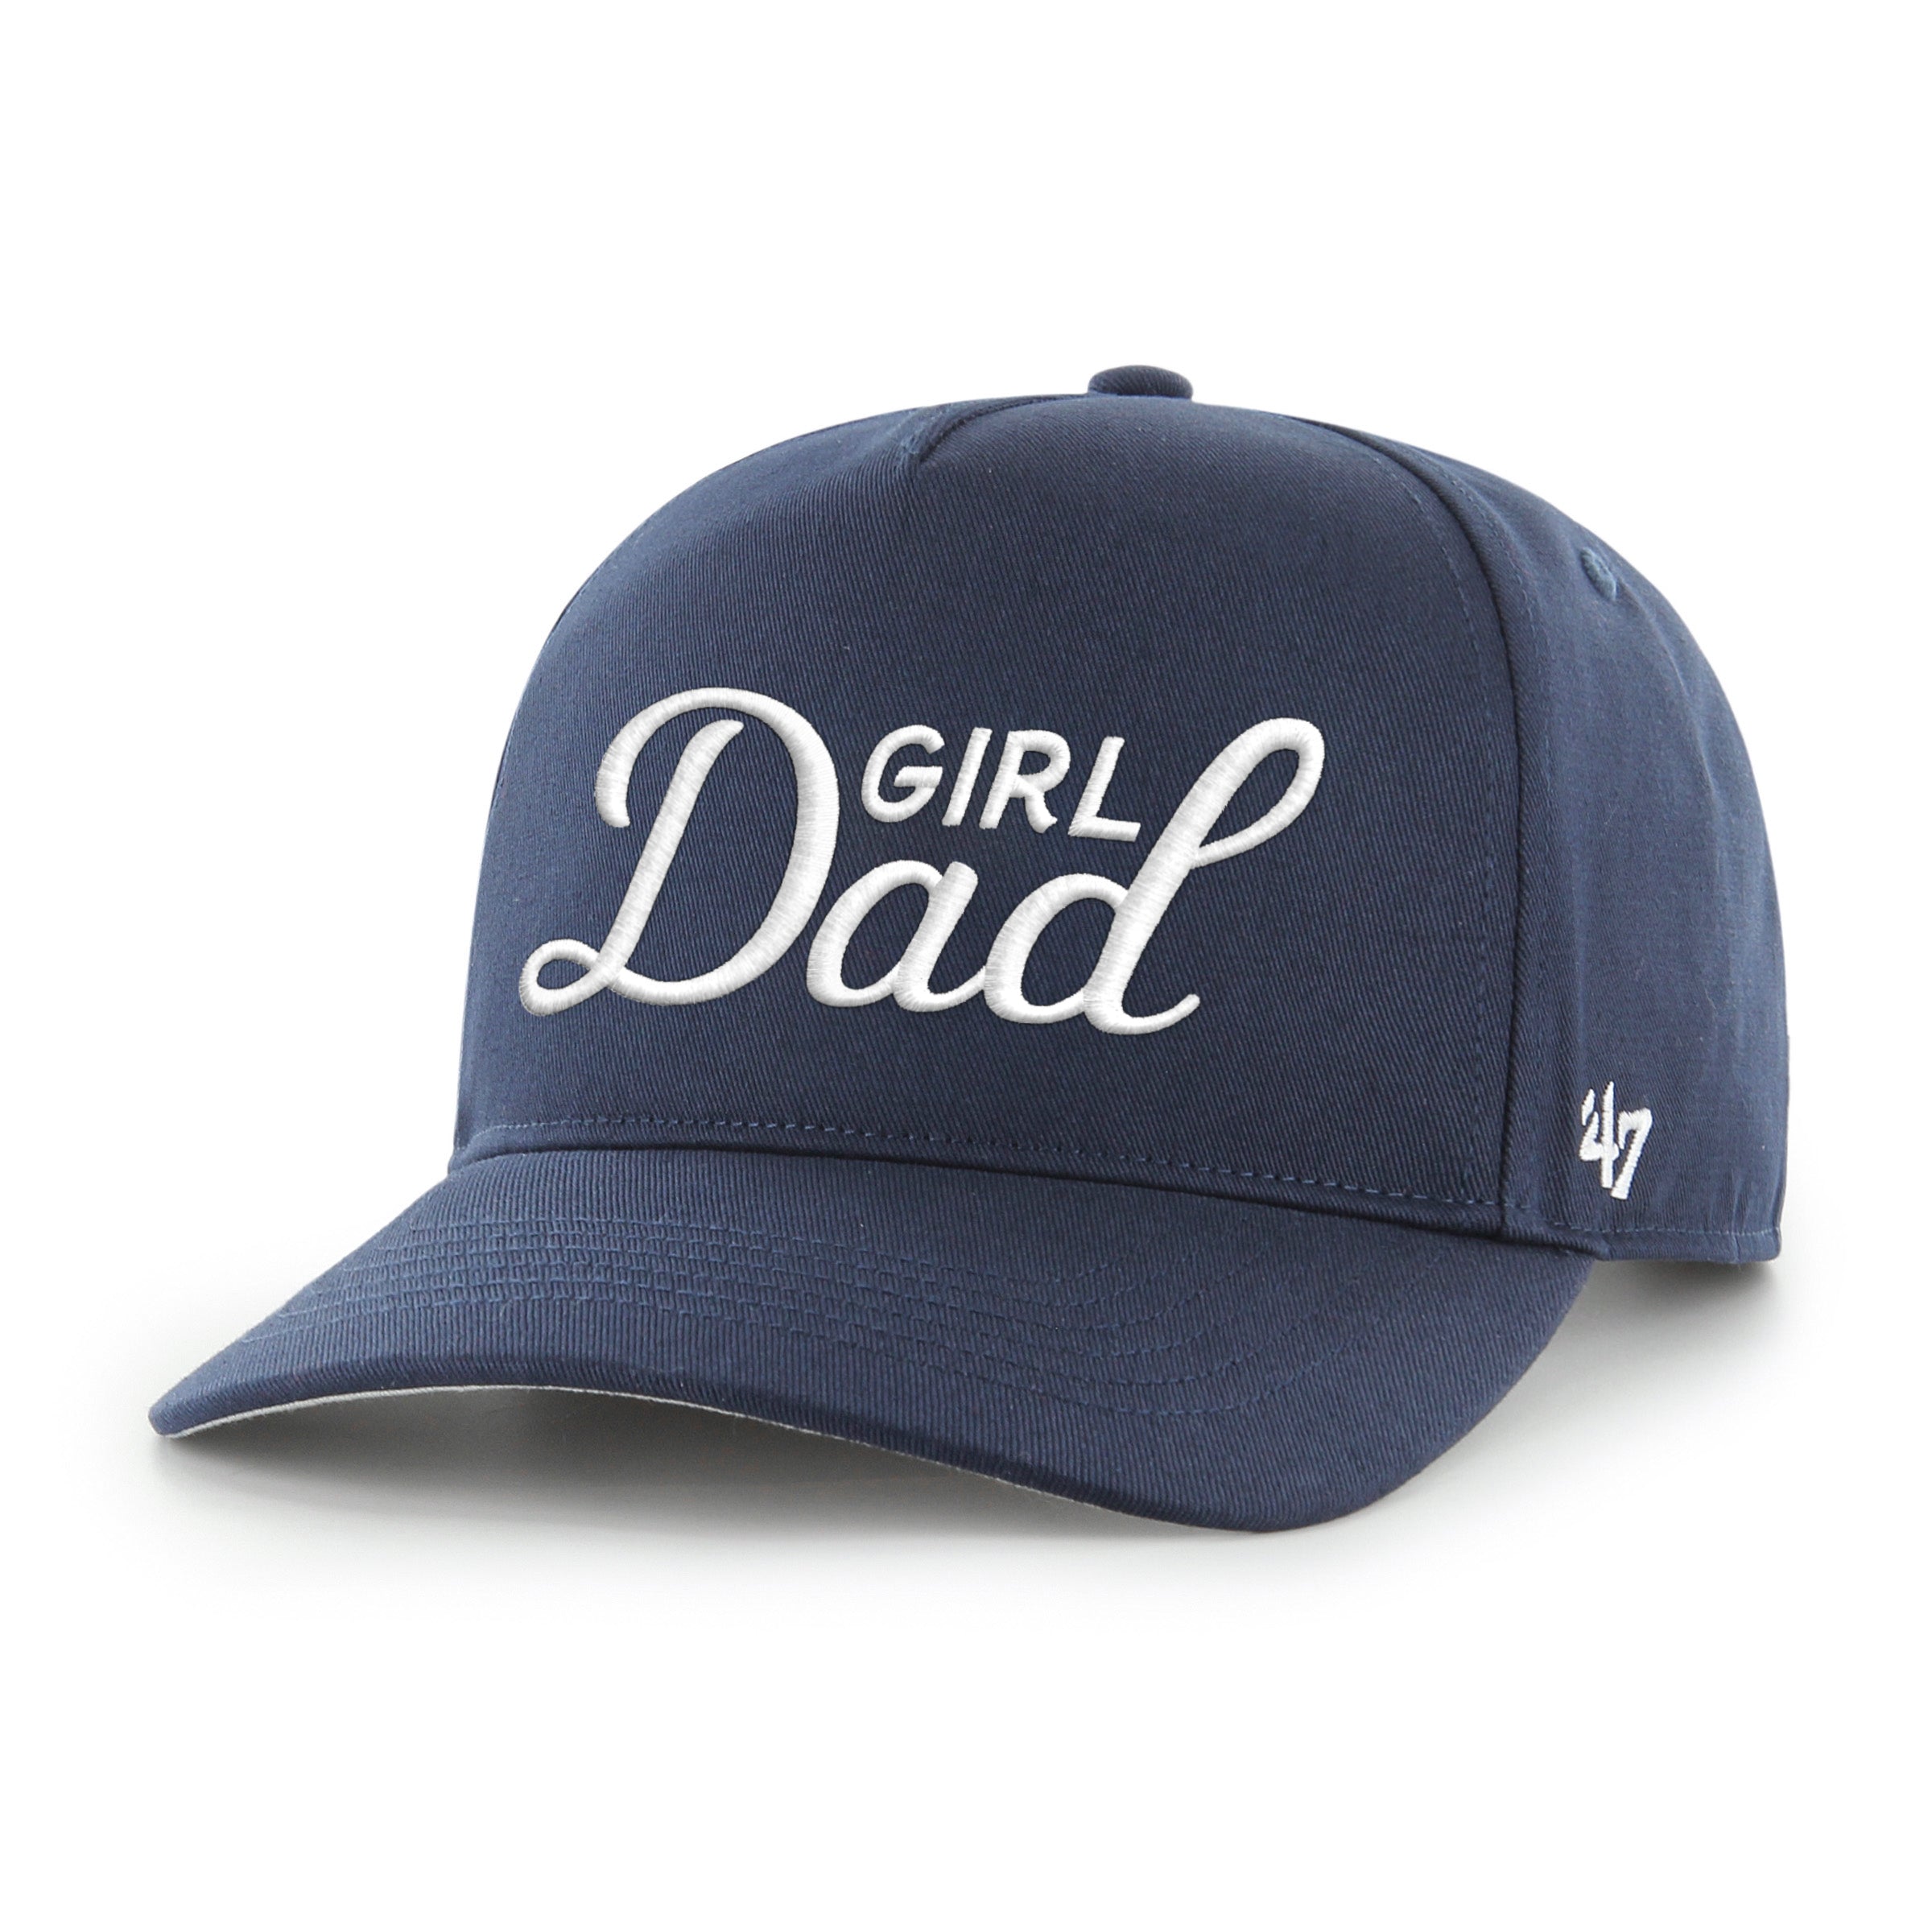 Girl Dad '47 Hitch Snapback Hat | Bussin' with The Boys Navy